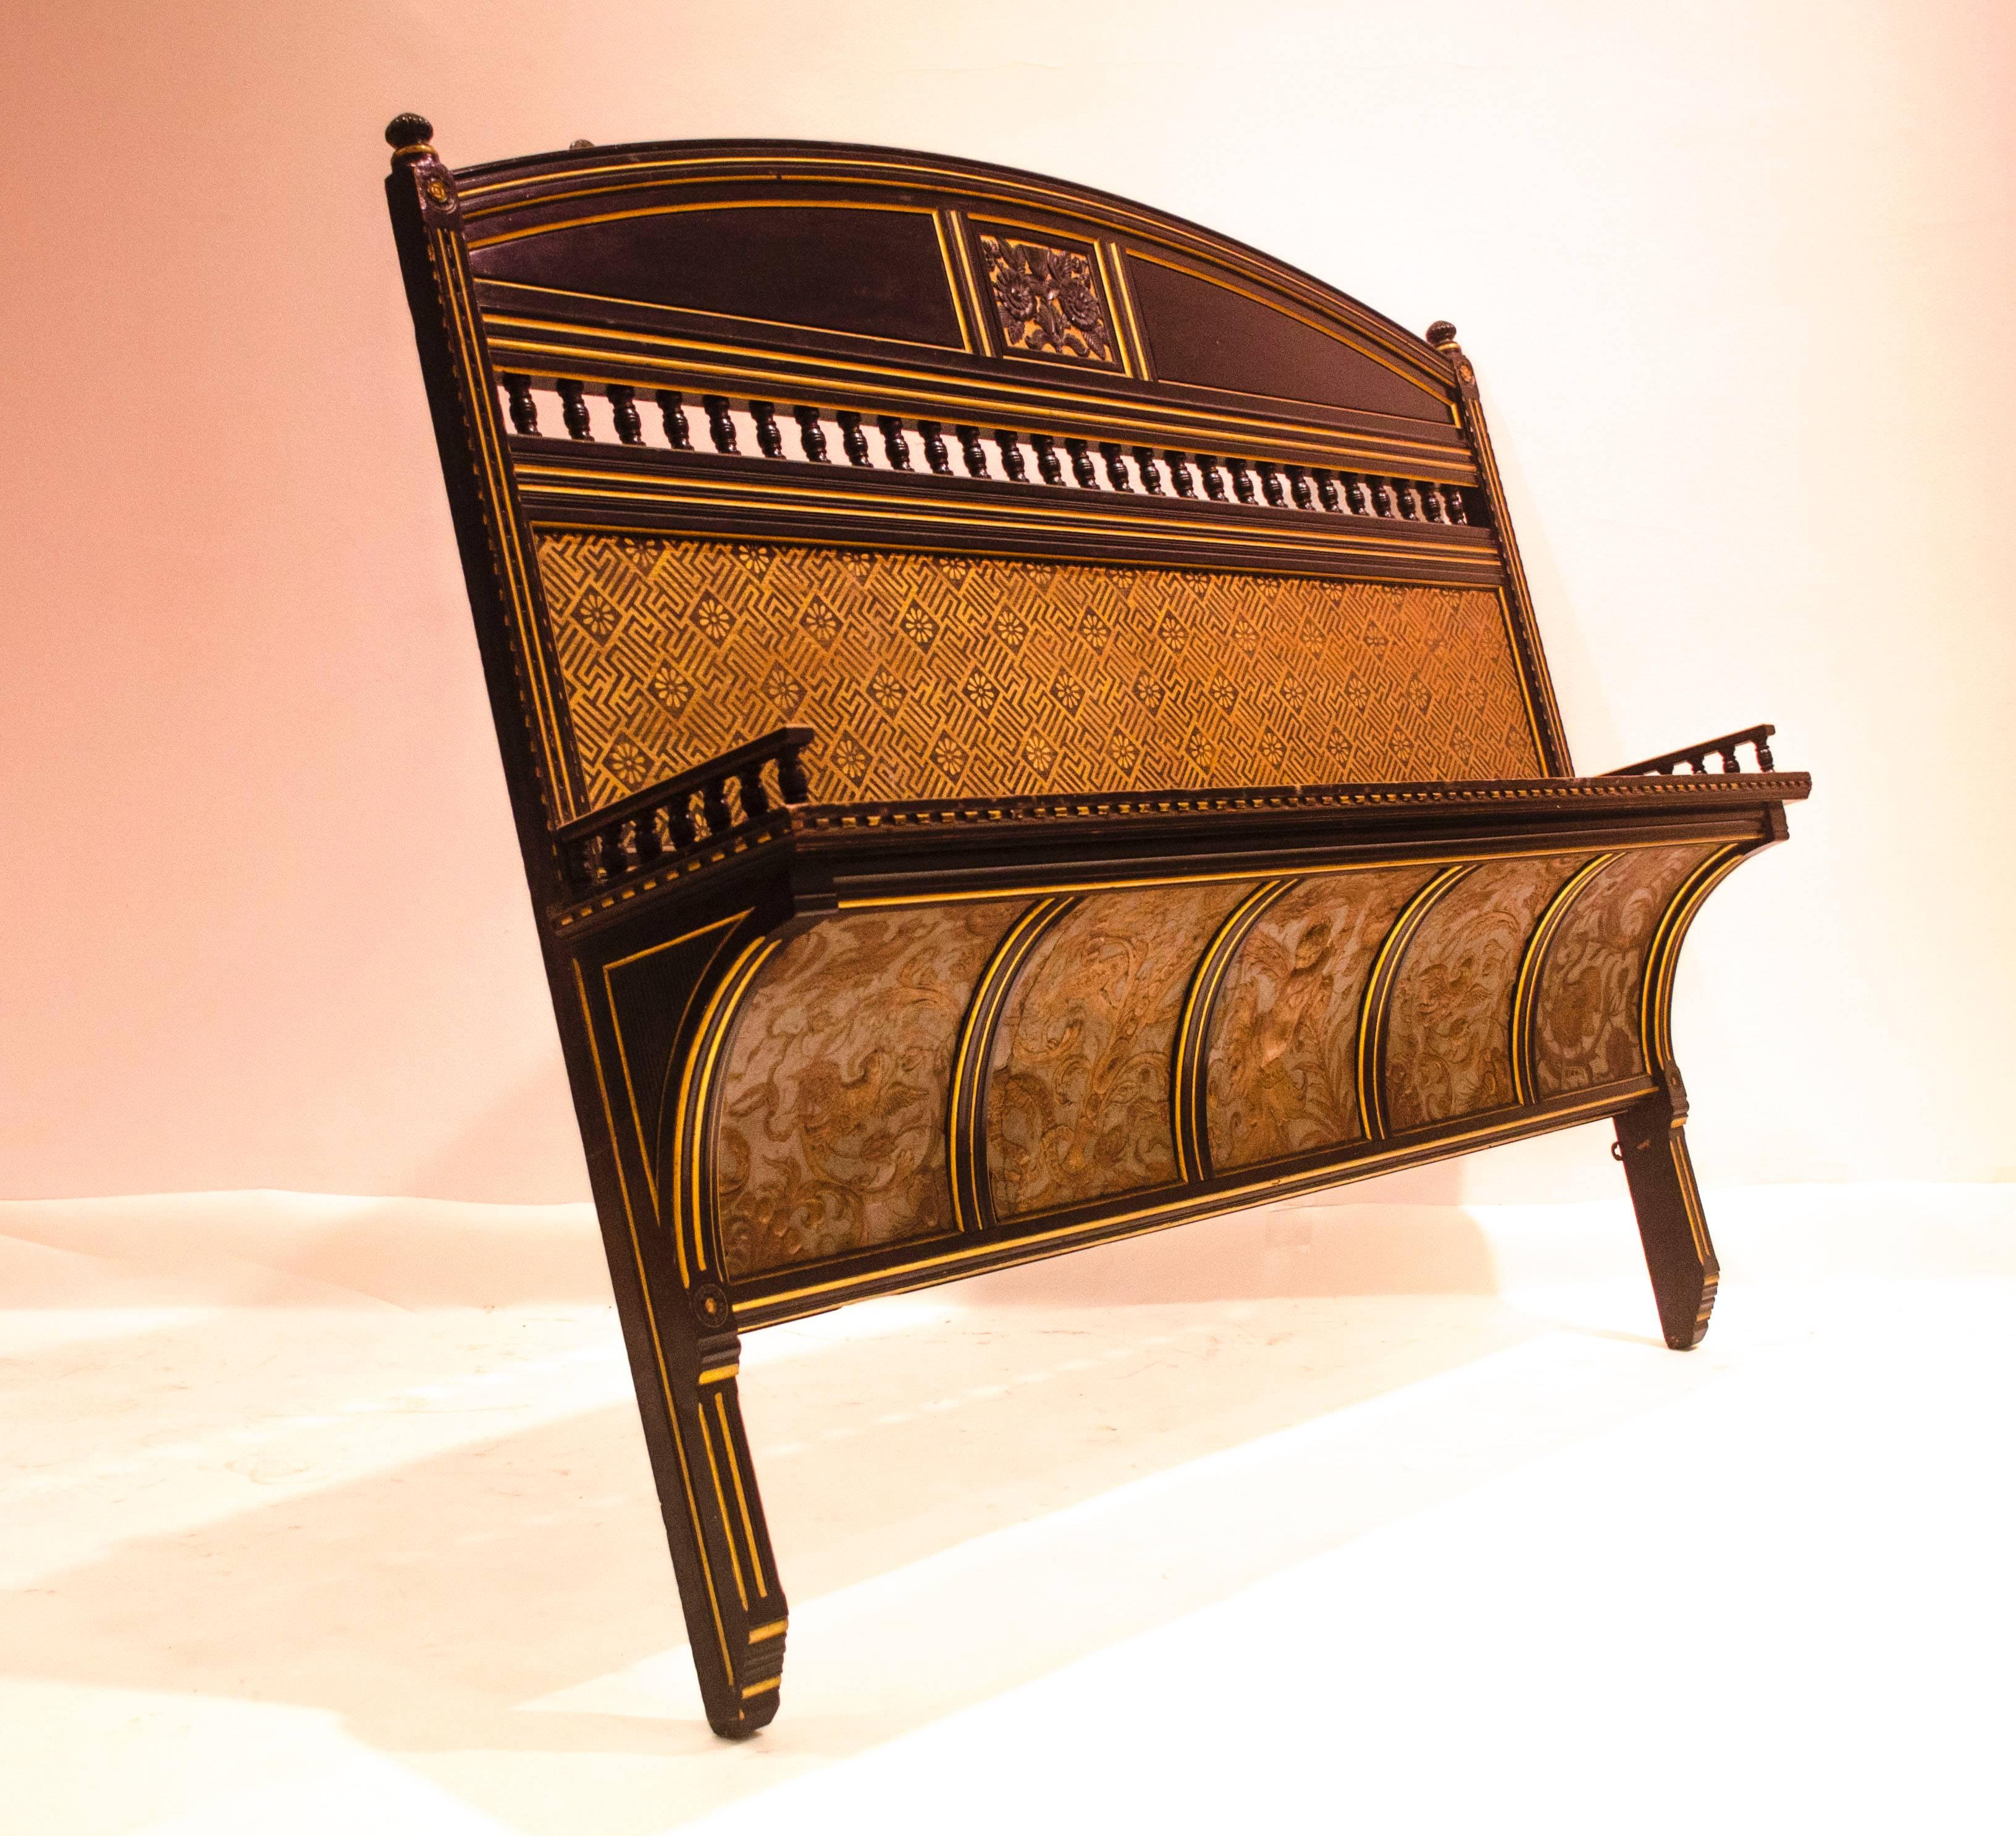 Bruce J Talbert, probably made by Gillows.
A rare Aesthetic Movement carved and gilt wall shelf with carved florets to the top center with gilt decoration above the shelf which has turned galleries to each side, to the base there is a curved